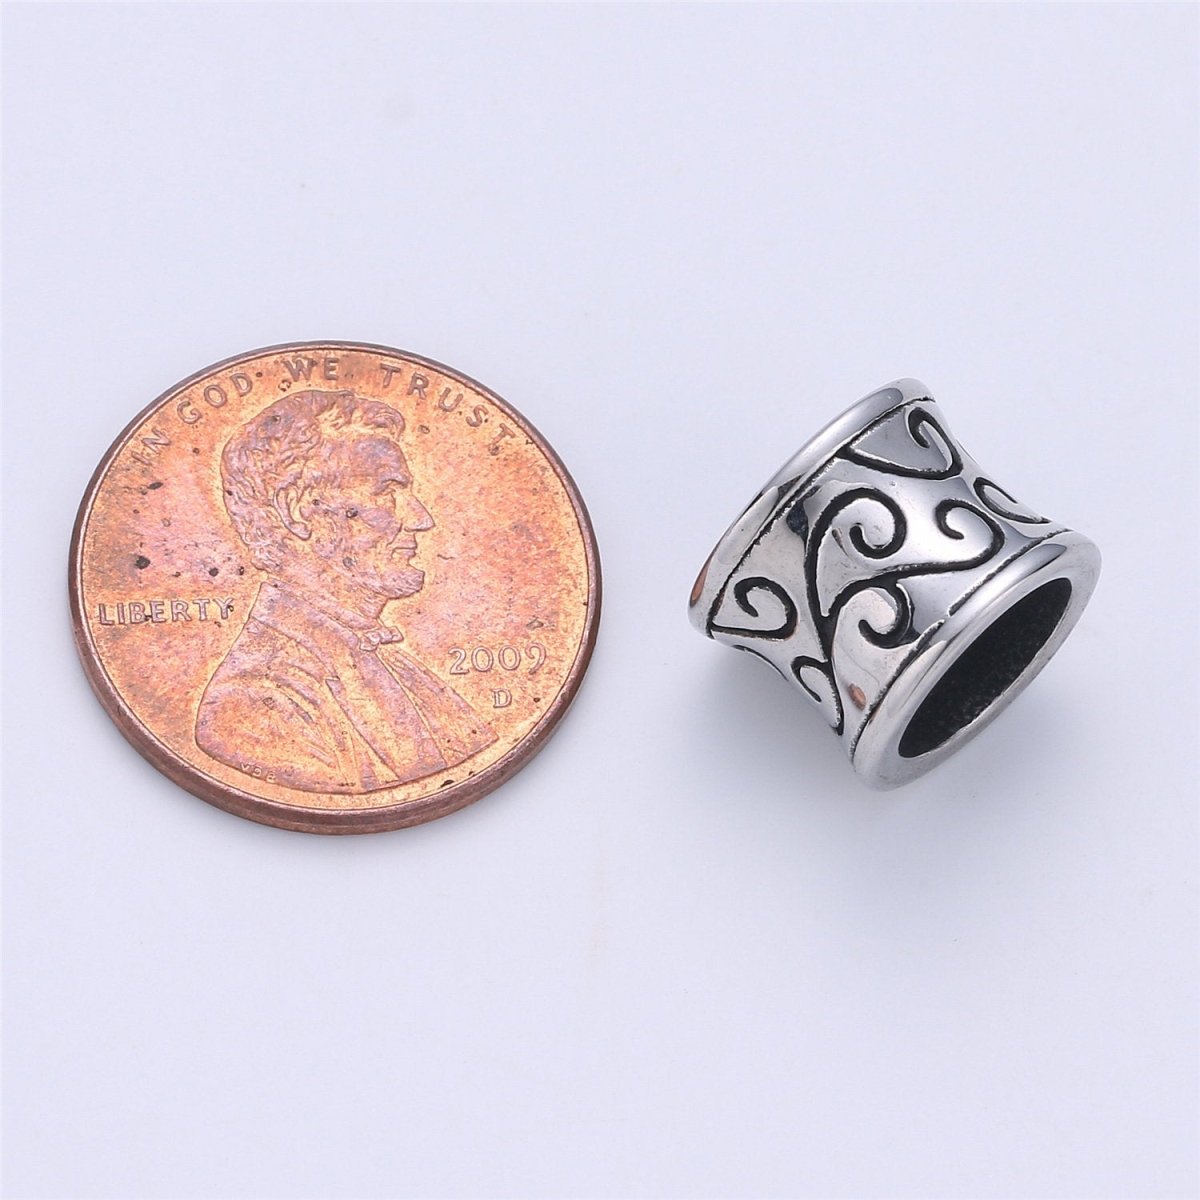 Stainless Steel Large Hole Wave Pattern Spacer Bead, for DIY Jewelry Making European Charms Beaded Bracelet, Bead Size 11x9mm Hole 4mm B-448 - DLUXCA